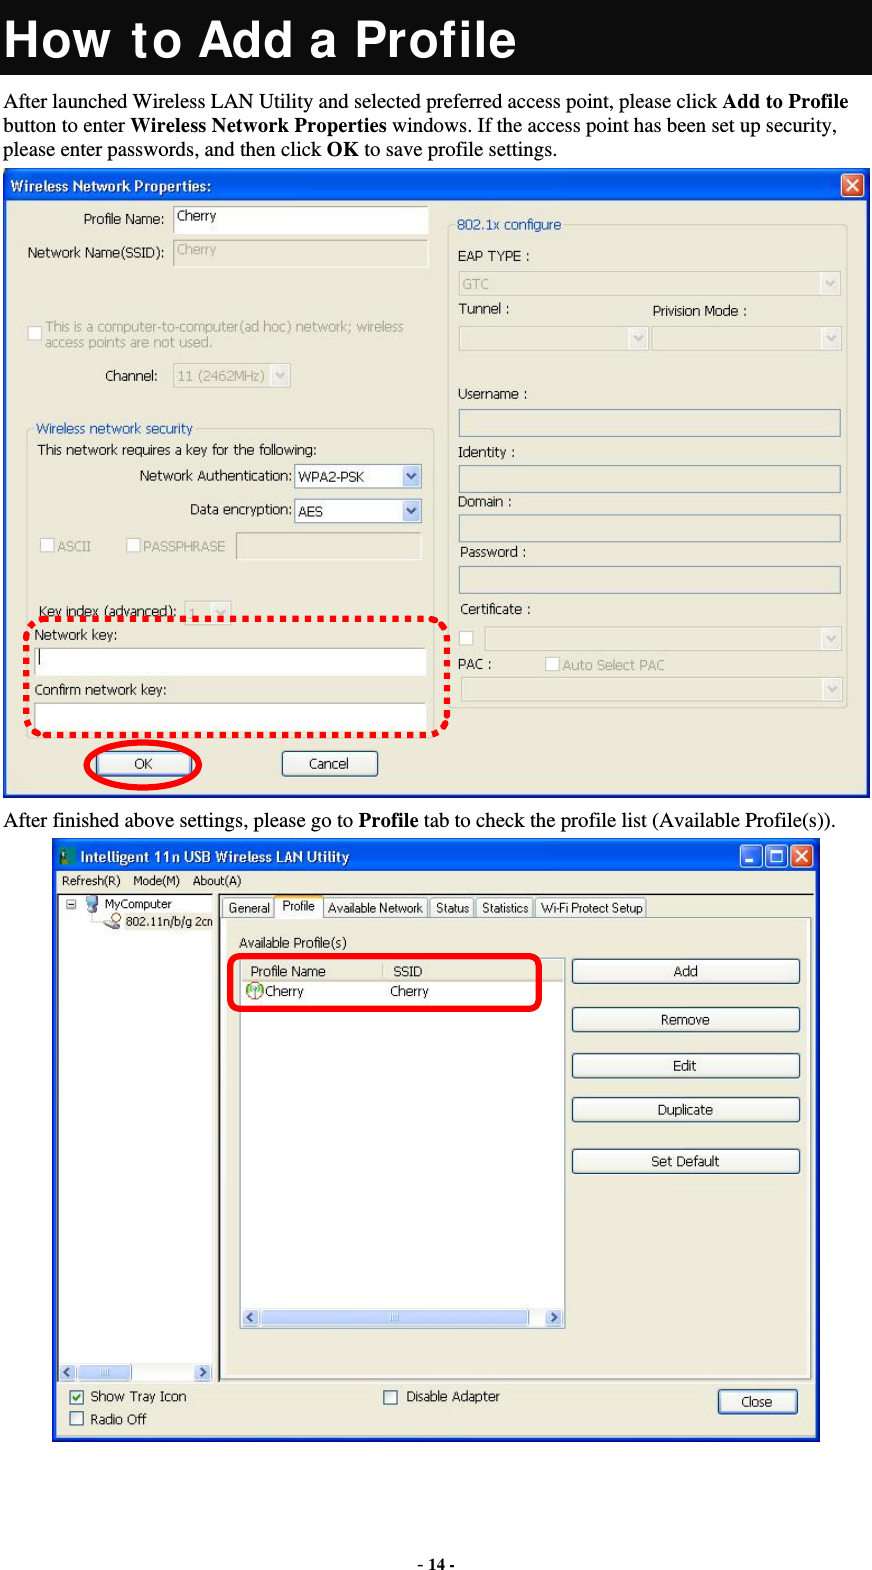  - 14 - How  to Add a Profile After launched Wireless LAN Utility and selected preferred access point, please click Add to Profile button to enter Wireless Network Properties windows. If the access point has been set up security, please enter passwords, and then click OK to save profile settings.  After finished above settings, please go to Profile tab to check the profile list (Available Profile(s)).  